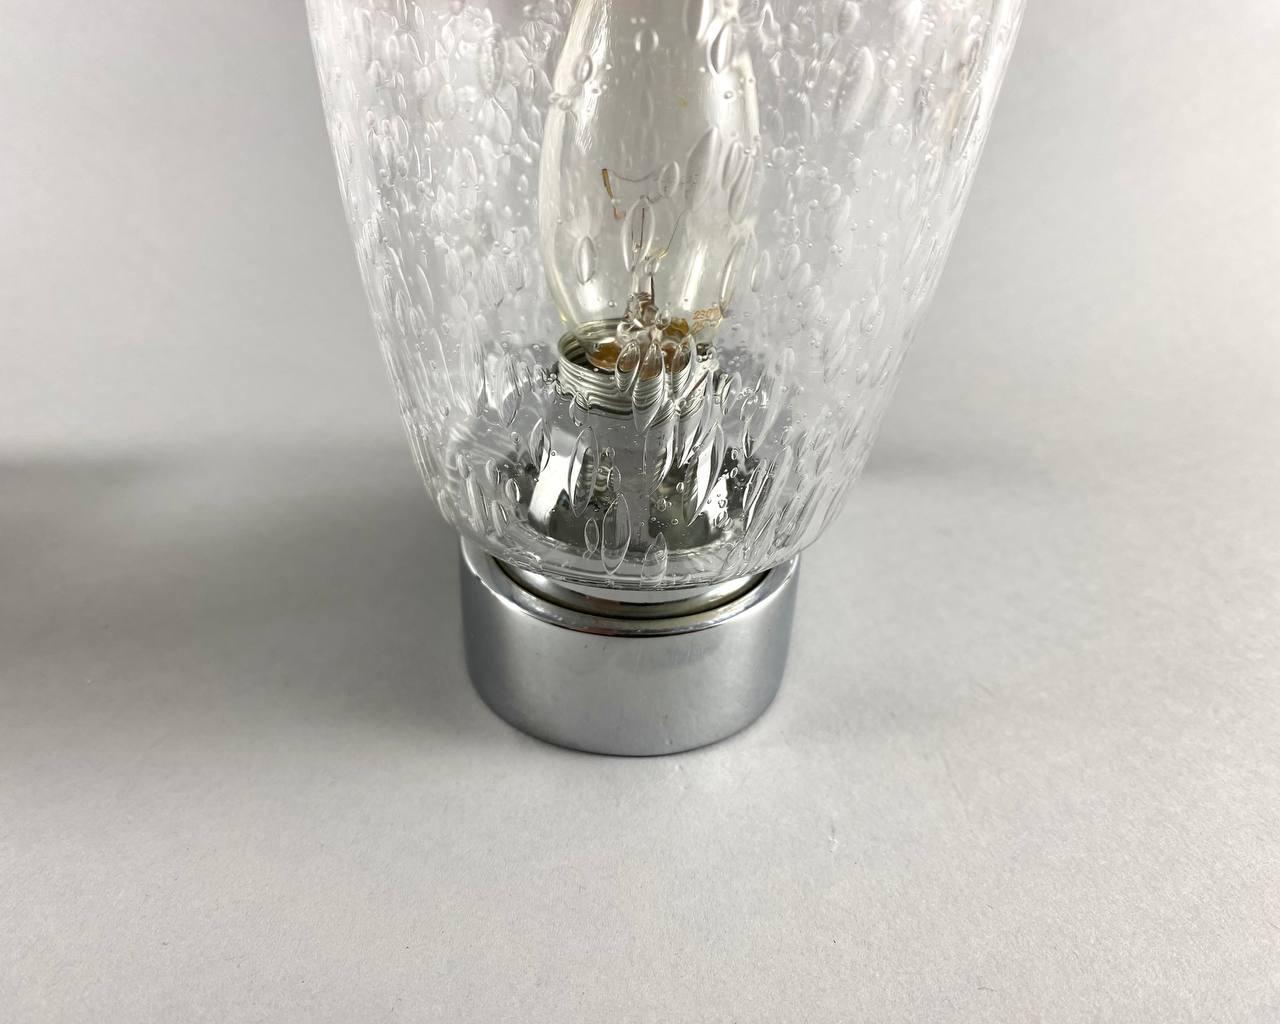 Vintage Single Wall Sconce Cracked Glass Wall Lamp with Brass Fixture In Excellent Condition For Sale In Bastogne, BE